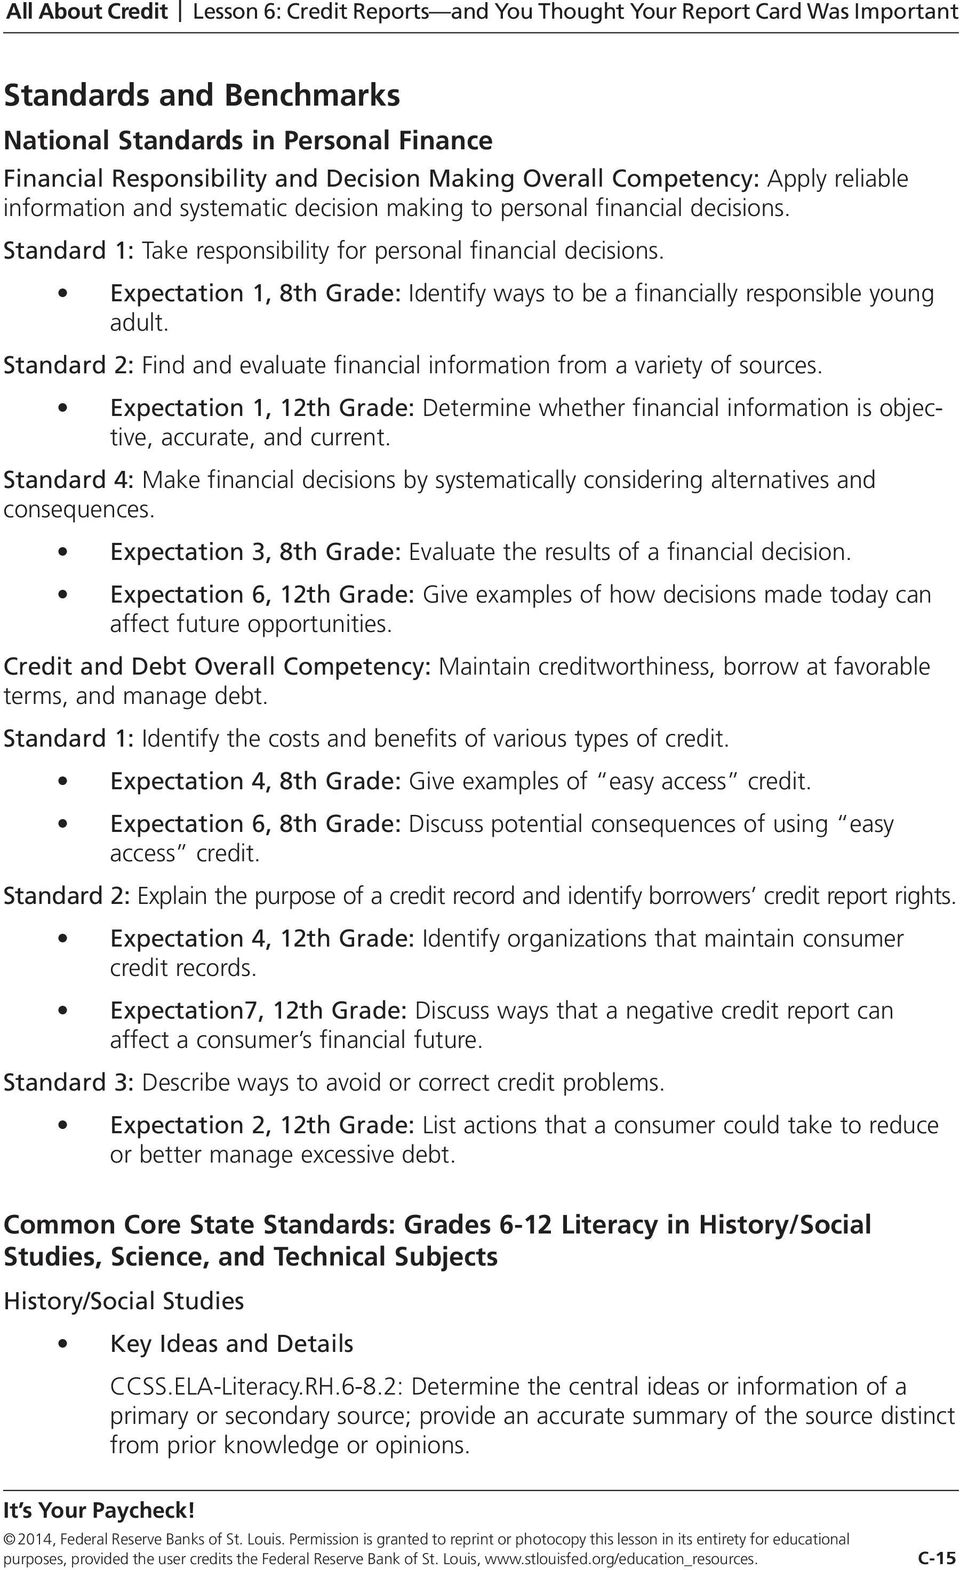 Standard 2: Find and evaluate financial information from a variety of sources. Expectation 1, 12th Grade: Determine whether financial information is objective, accurate, and current.